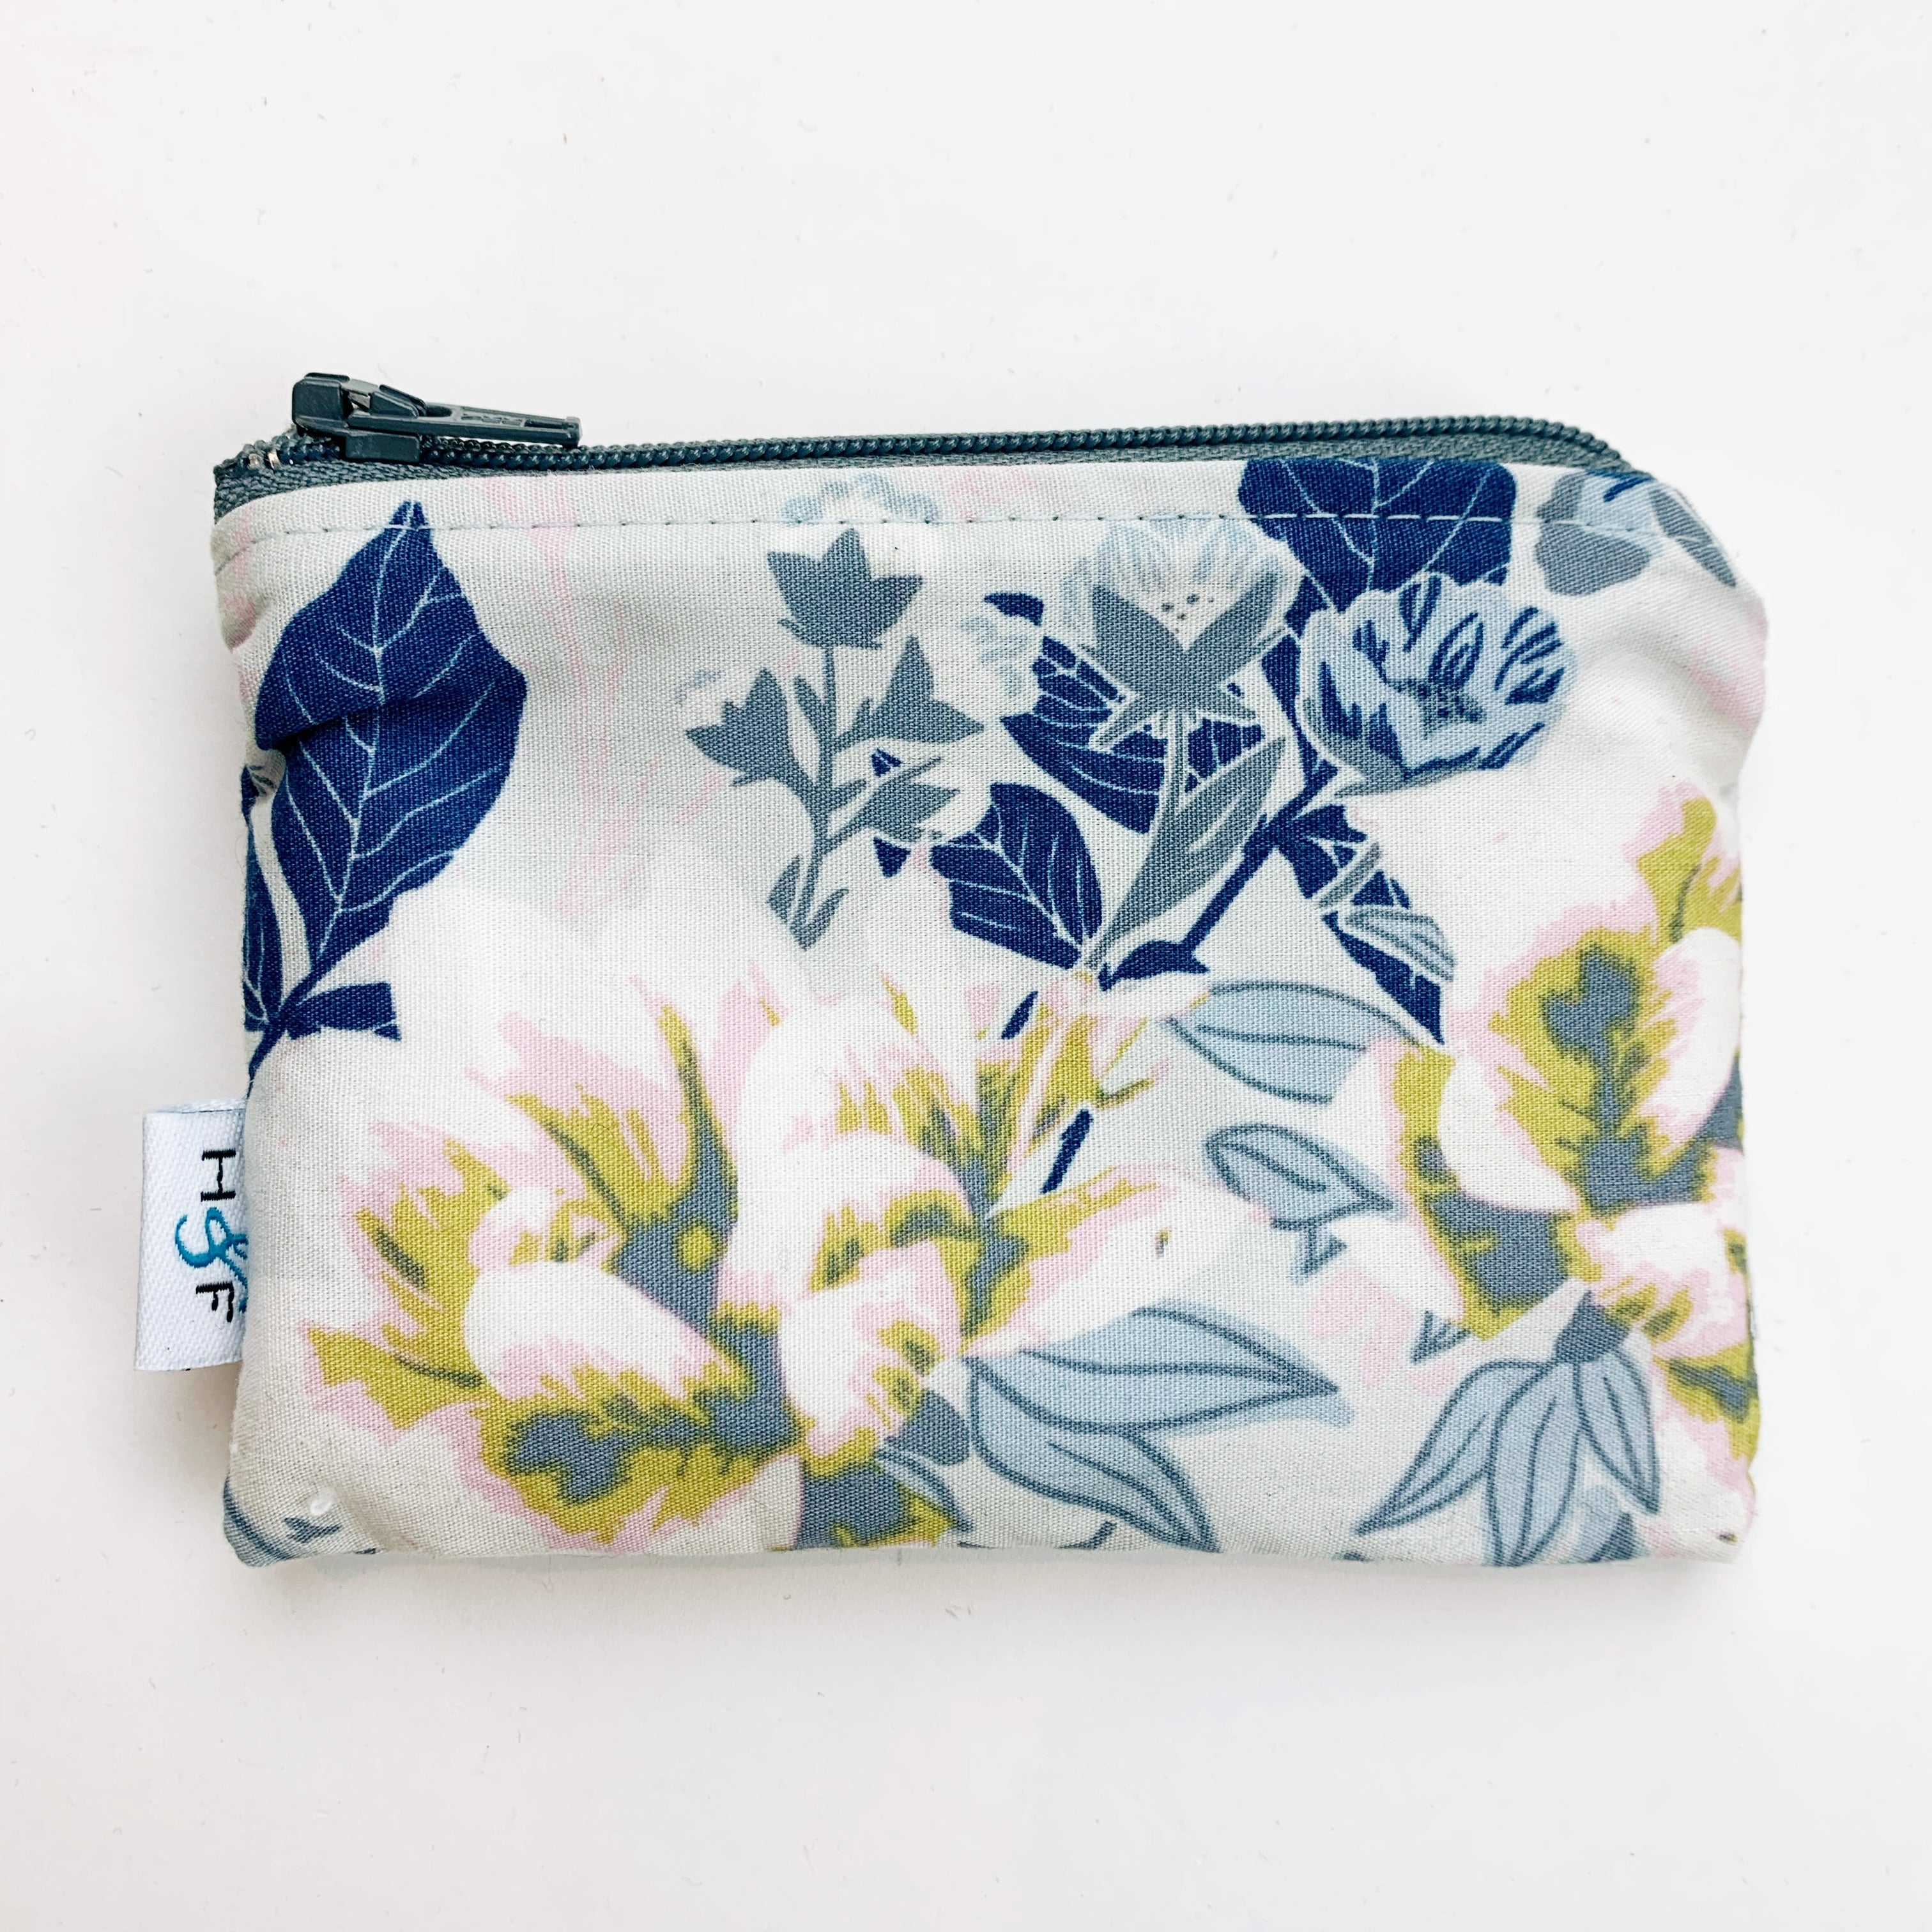 SMALL ReUsable Snack Bag - dusty blue floral